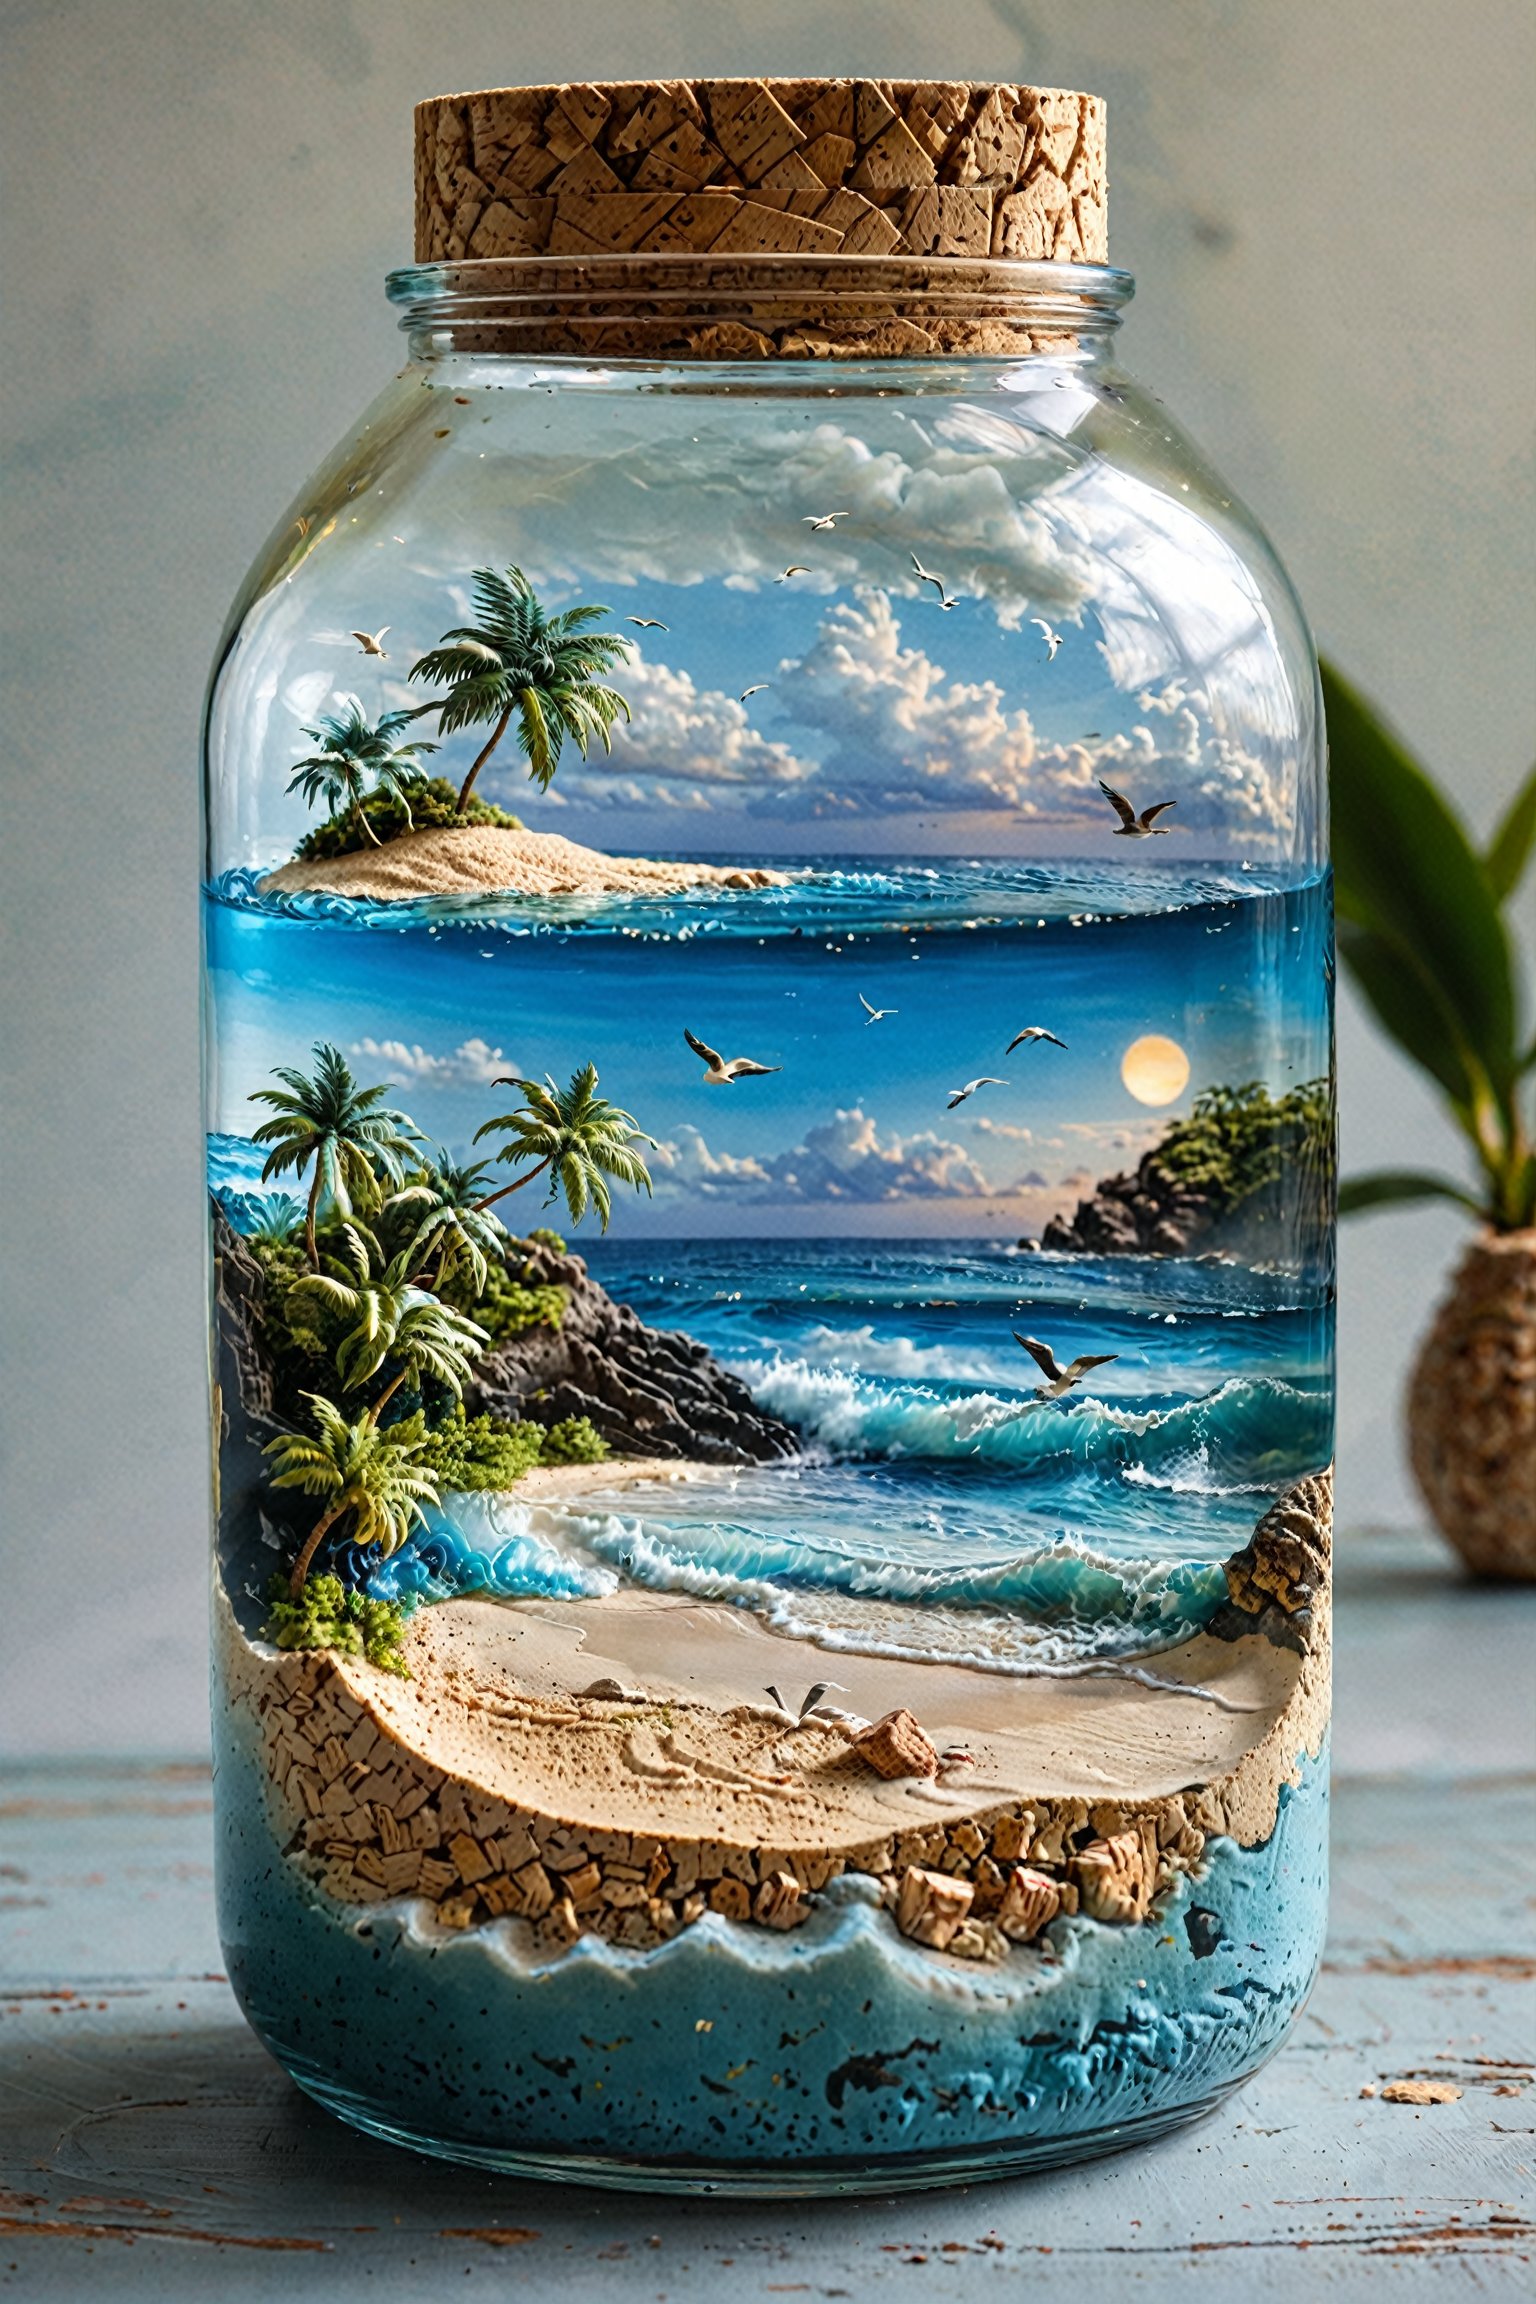 A glass jar with a cork lid. Inside the jar, there's a miniature representation of a tropical beach scene. The top layer of the jar depicts a serene beach with palm trees, a clear blue sky with fluffy clouds, and a few birds flying. The water is calm with gentle waves. The bottom layer of the jar reveals a rocky coastline with waves crashing against the rocks. The entire scene is encapsulated within the jar, creating a surreal and captivating visual.